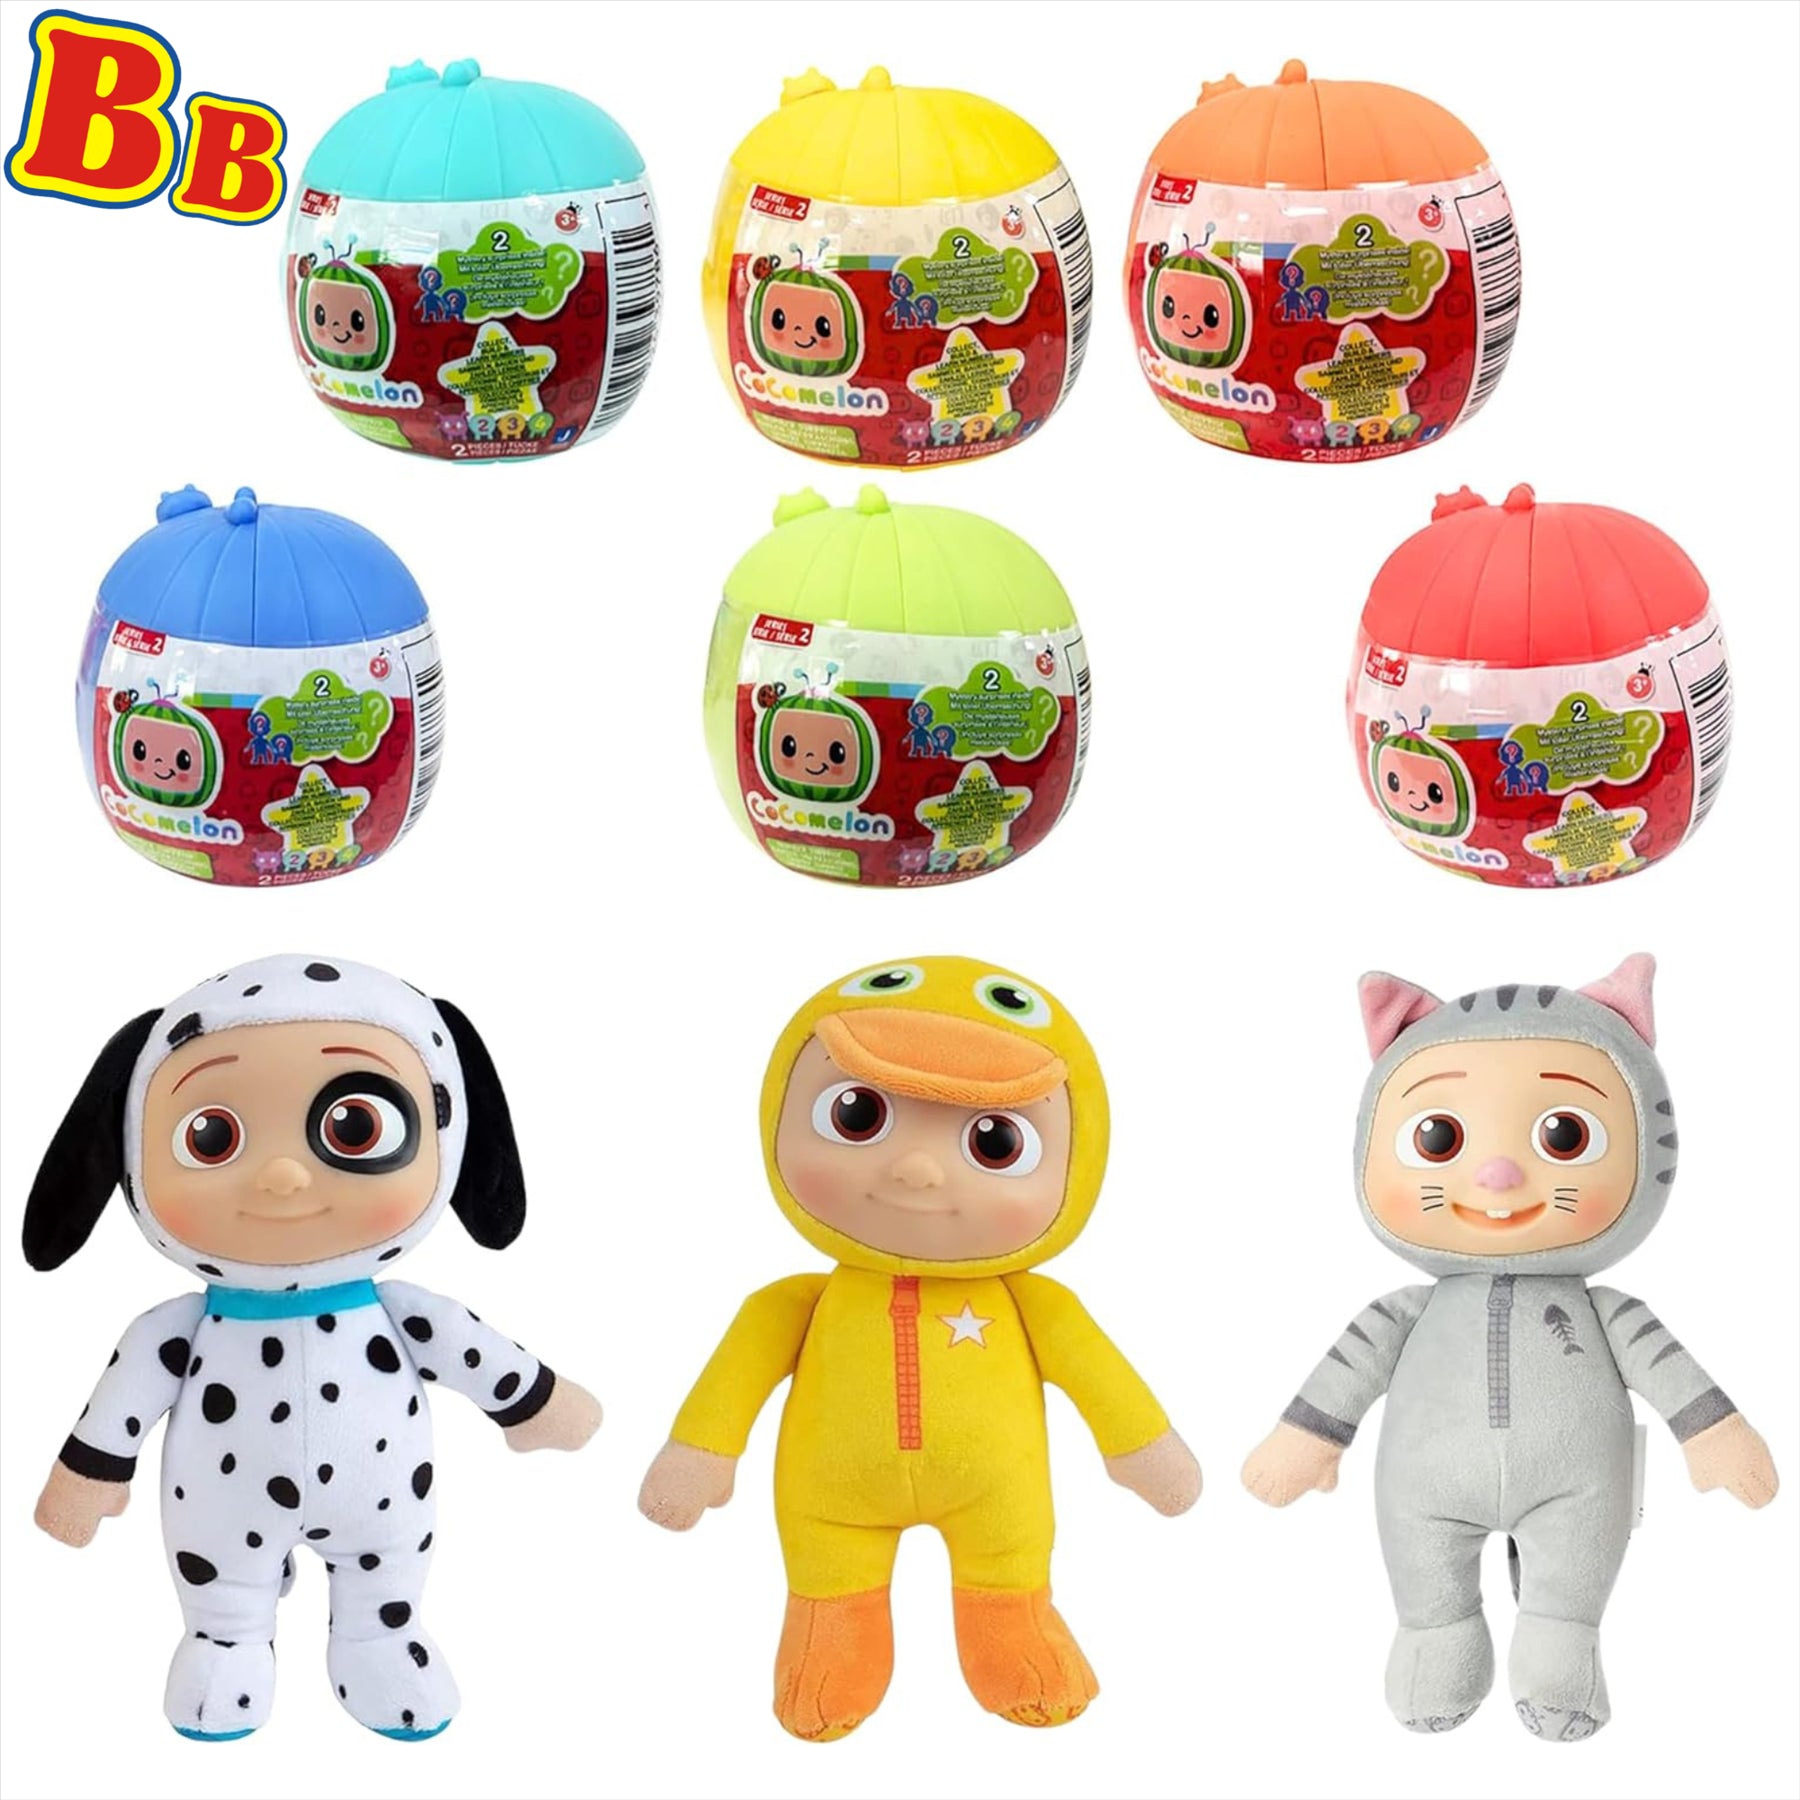 CoComelon Blind Capsule Number Character Articulated Figure Set - All 3 Plush Toys and 6x Balls